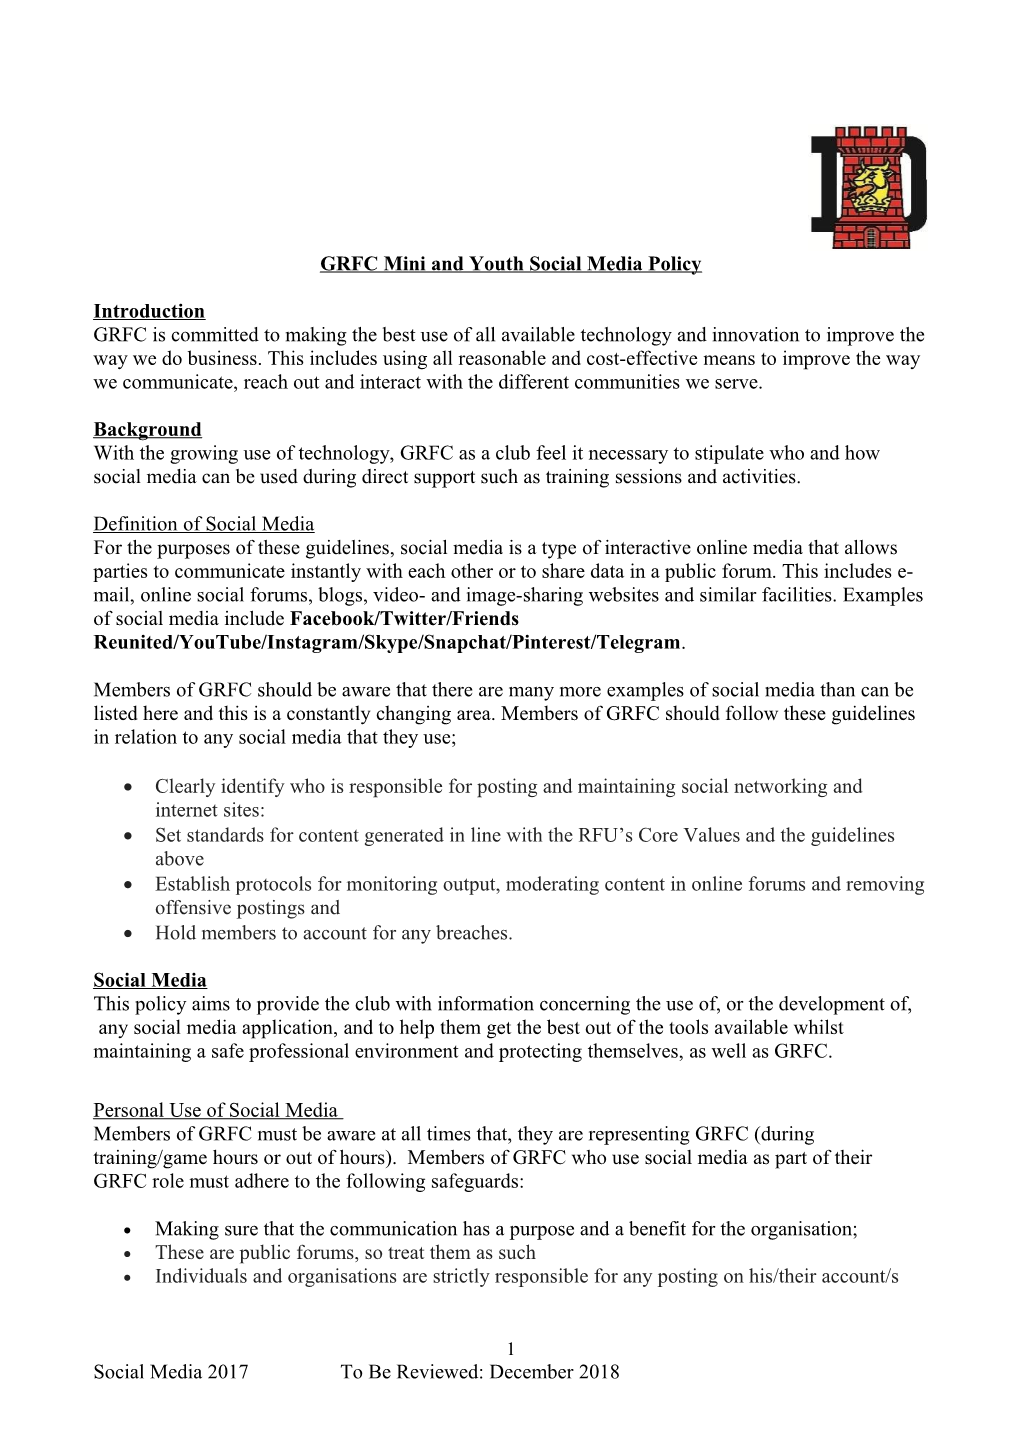 GRFC Mini and Youth Social Media Policy